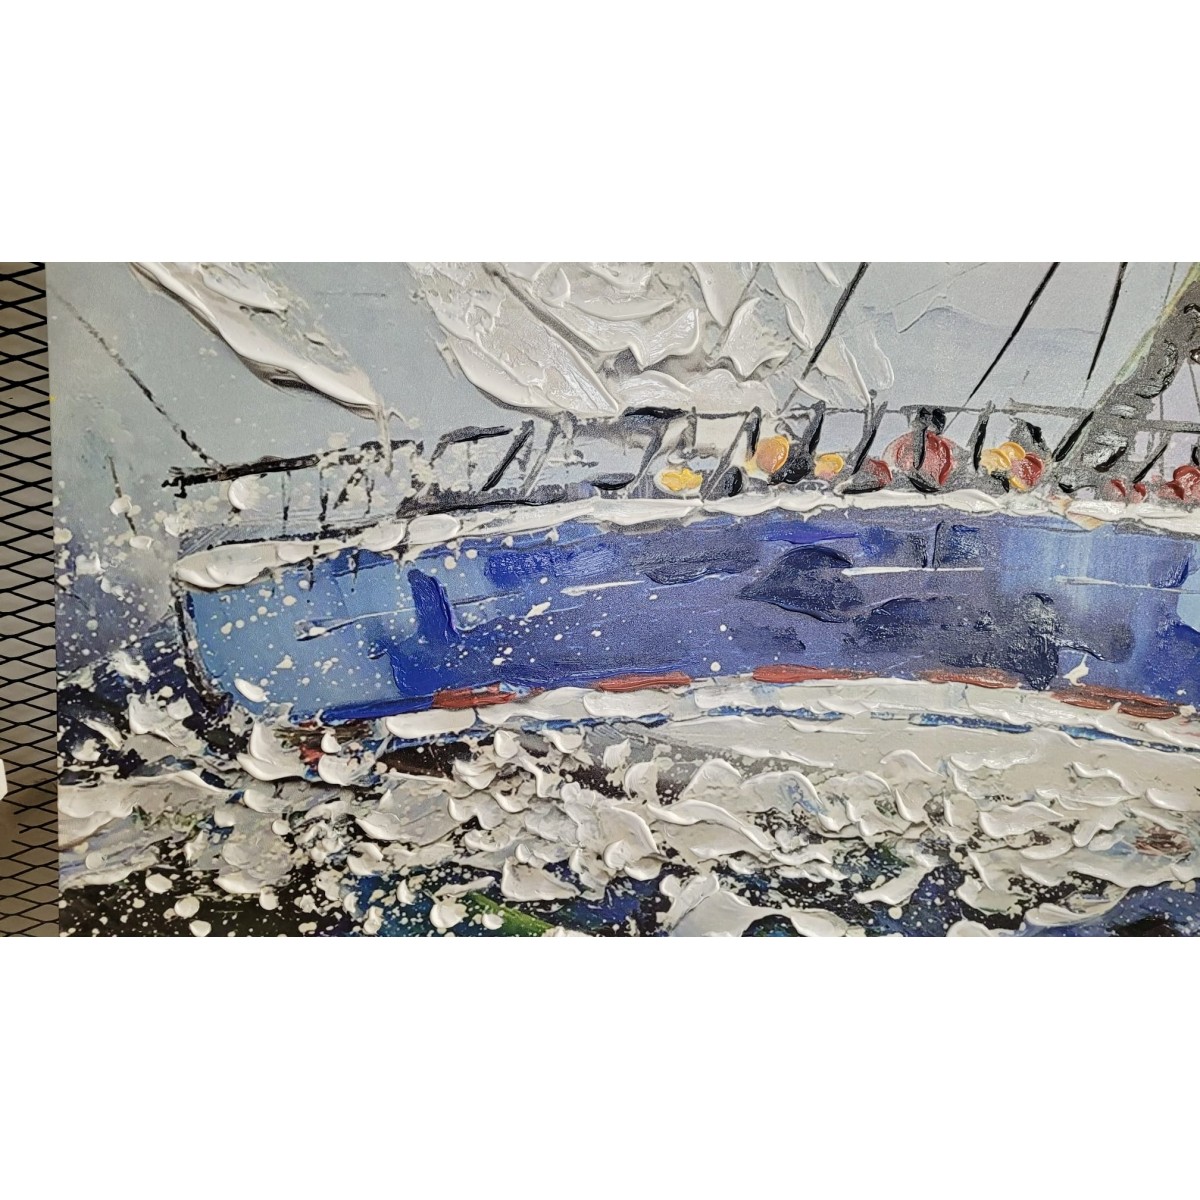 Sailing Race II 3D Heavy Textured Partial Oil Painting